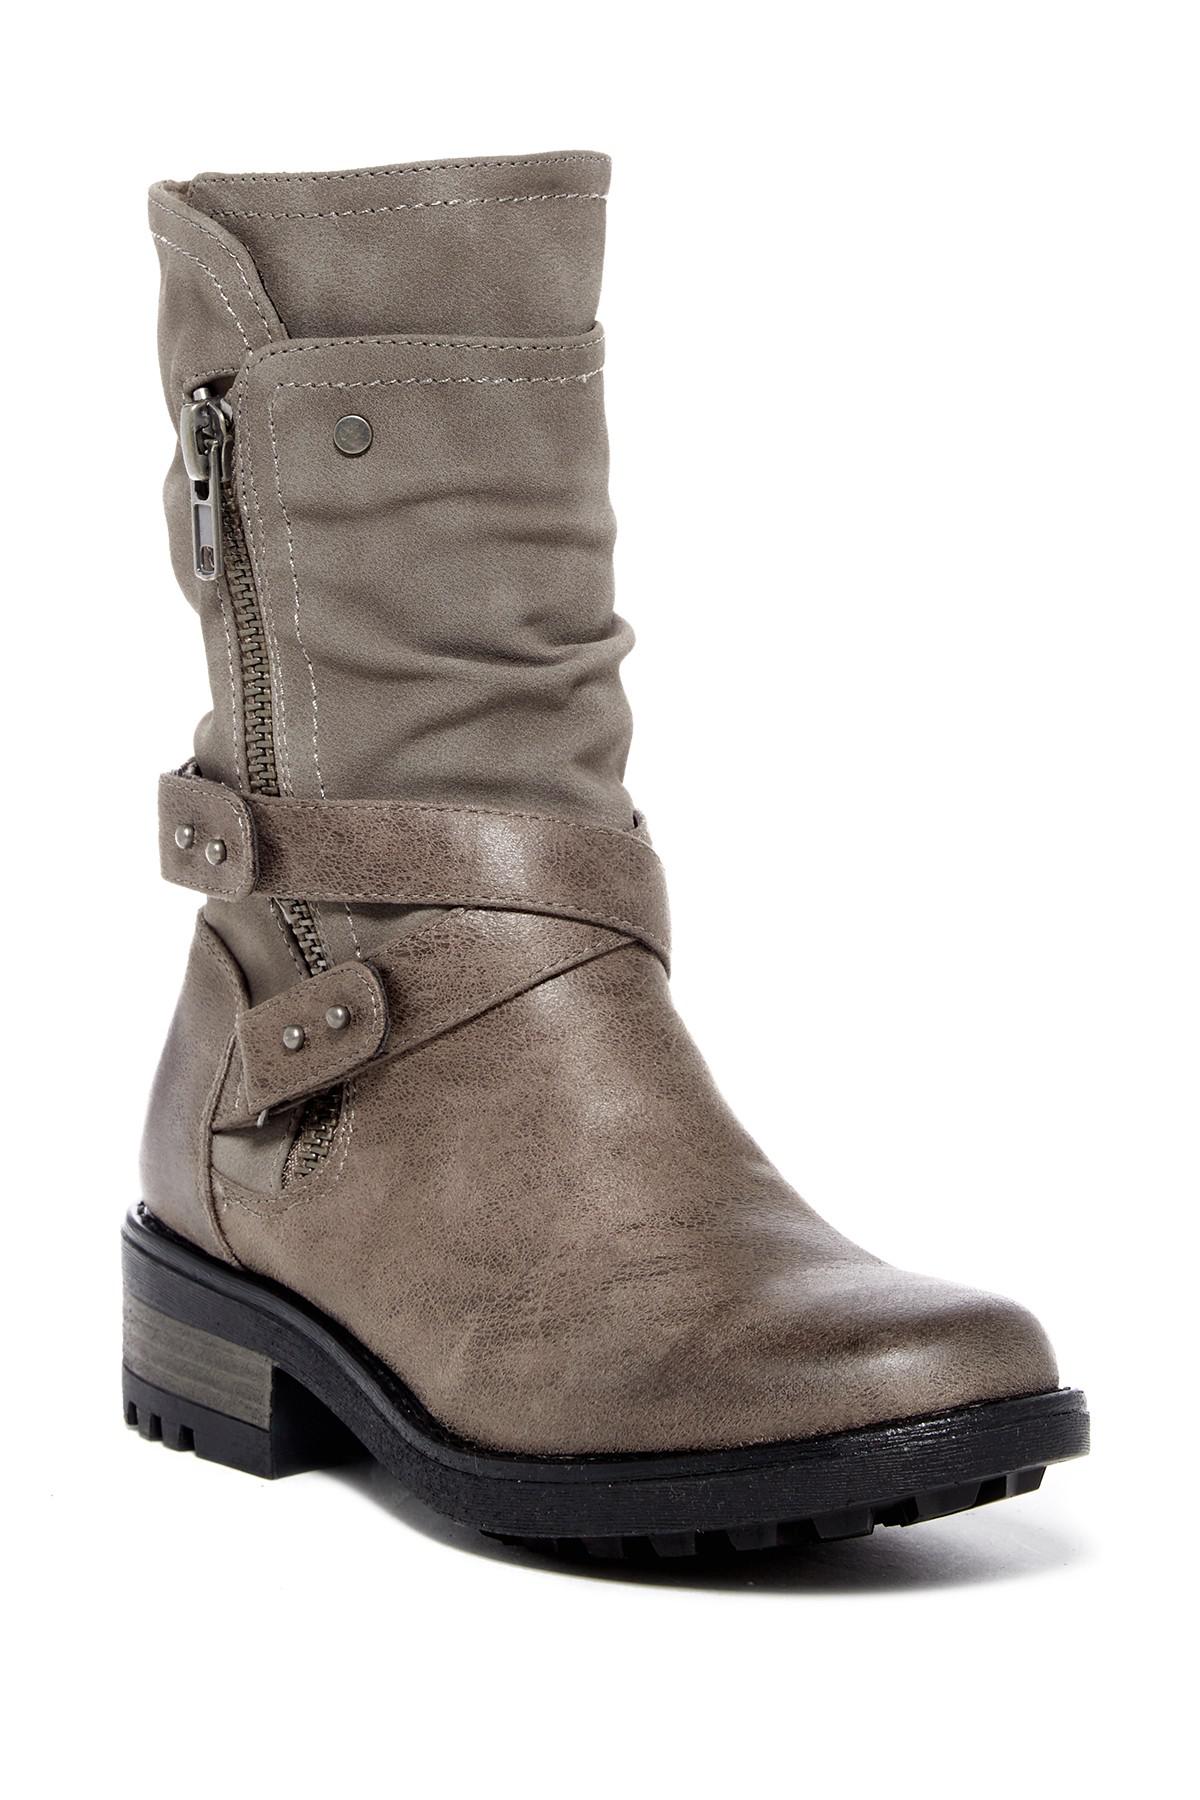 Carlos By Carlos Santana Sawyer Tall Boots in Taupe (Brown